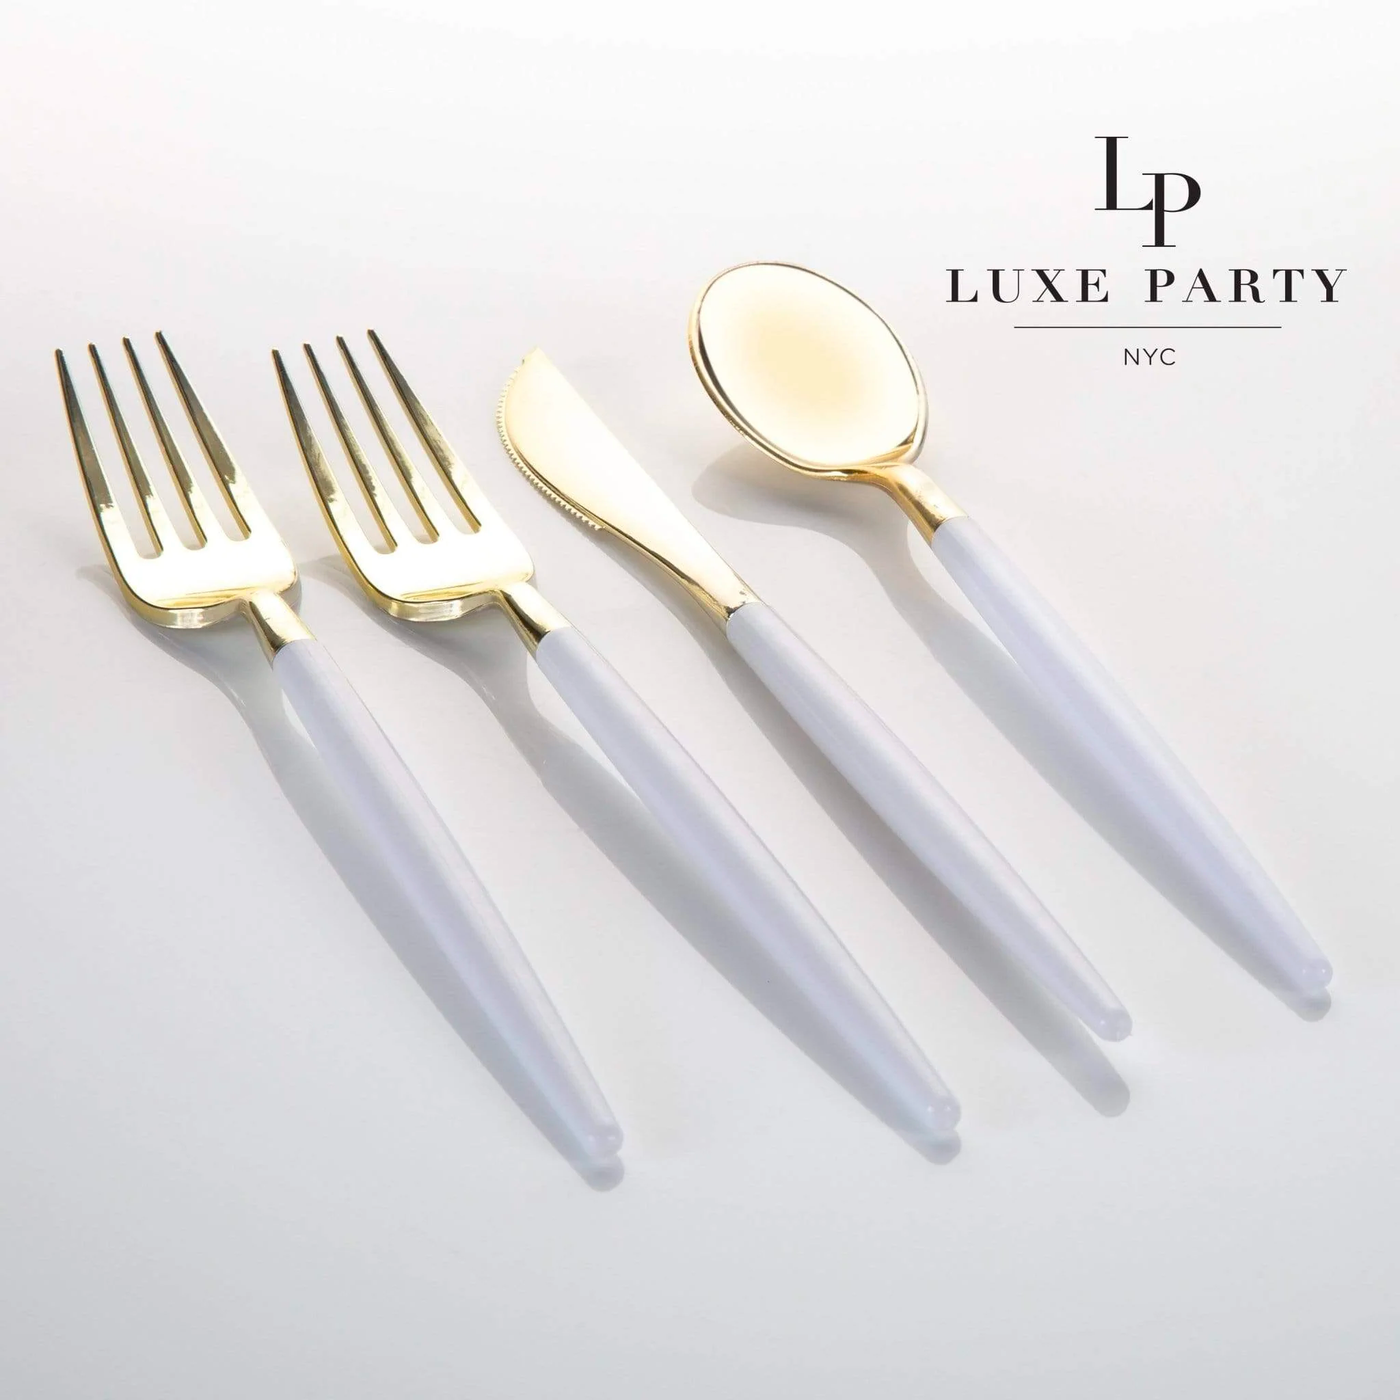 Chic Flatware Gold/White Combo (16 Forks + 8 Knives + 8 Spoons) - EZ Party  USA